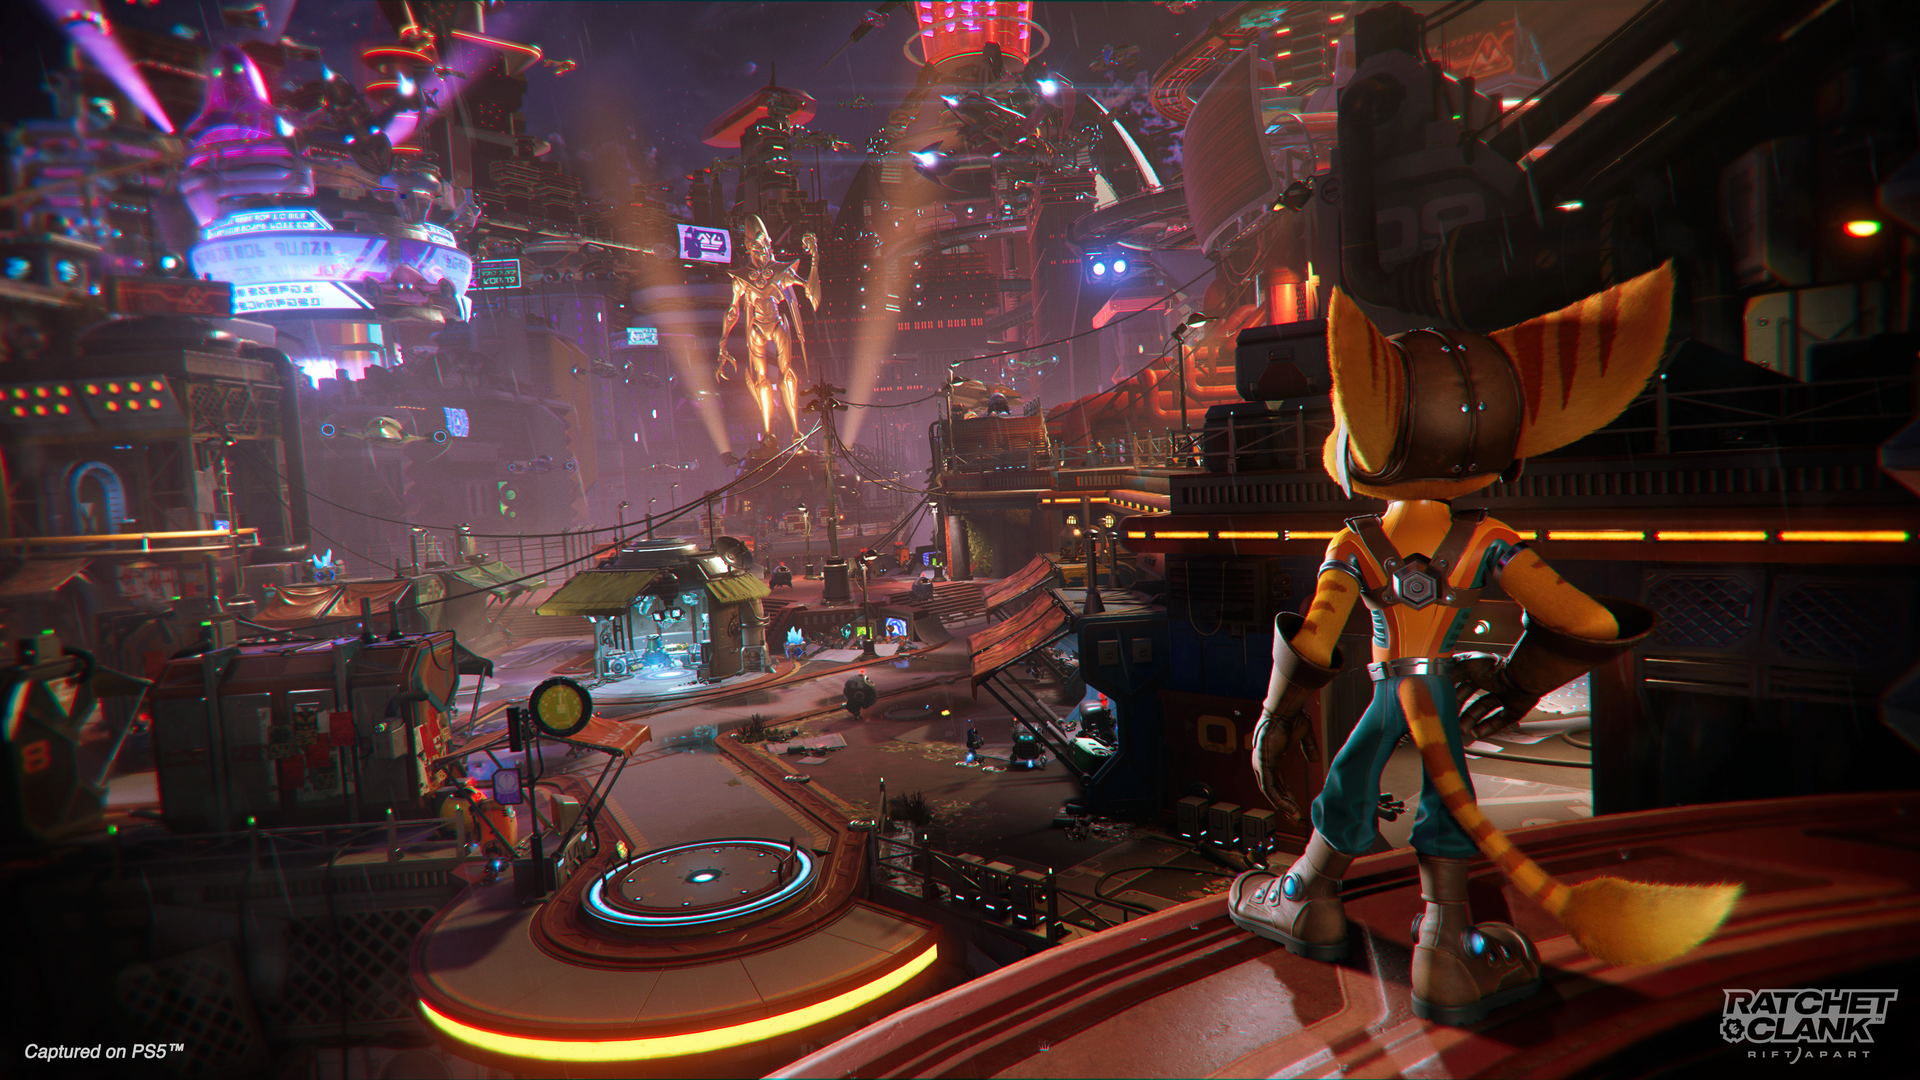 Screenshot of a scene of citylife from the video game "Ratchet & Clank: Rift Apart"